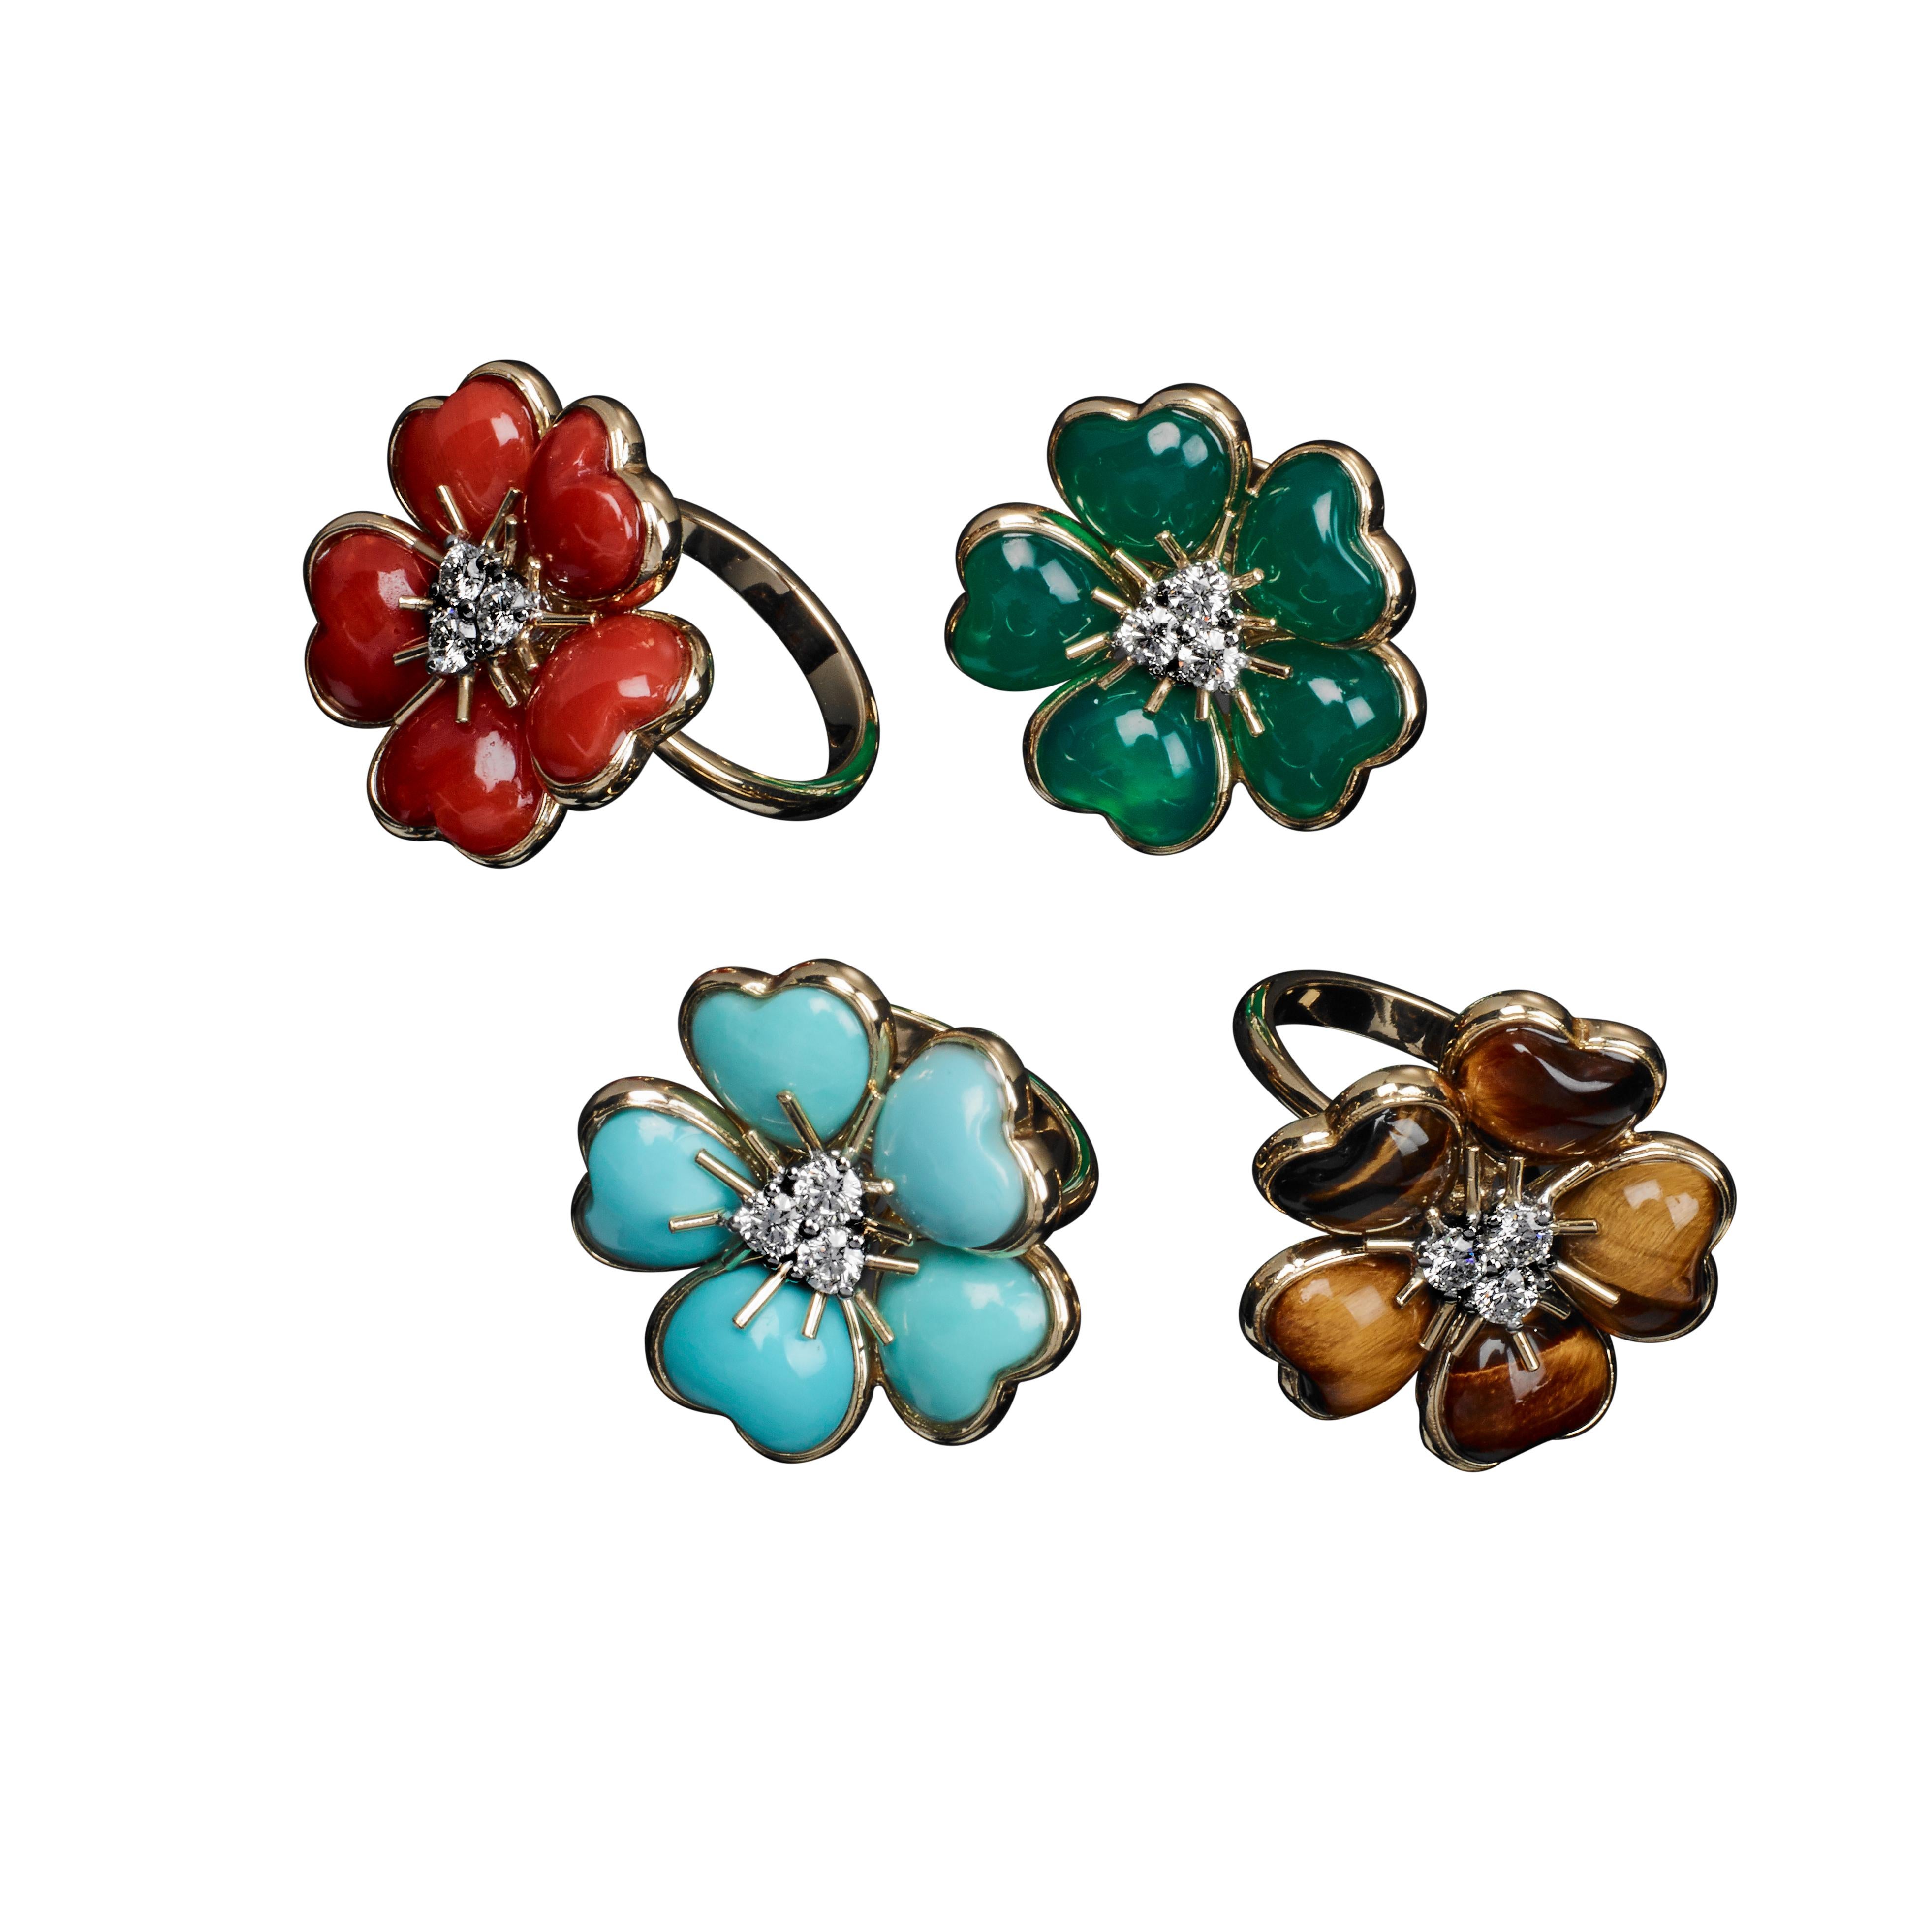 18 kt Yellow Gold Flower Ring adorned with Turquoise Inlays, resembling nice and charming petals, enriched with 0,32 carats of Brilliant-cut Diamonds, G colour, IF clarity.
The ring is part of the lovely, multi-coloured, joyful Collection: 